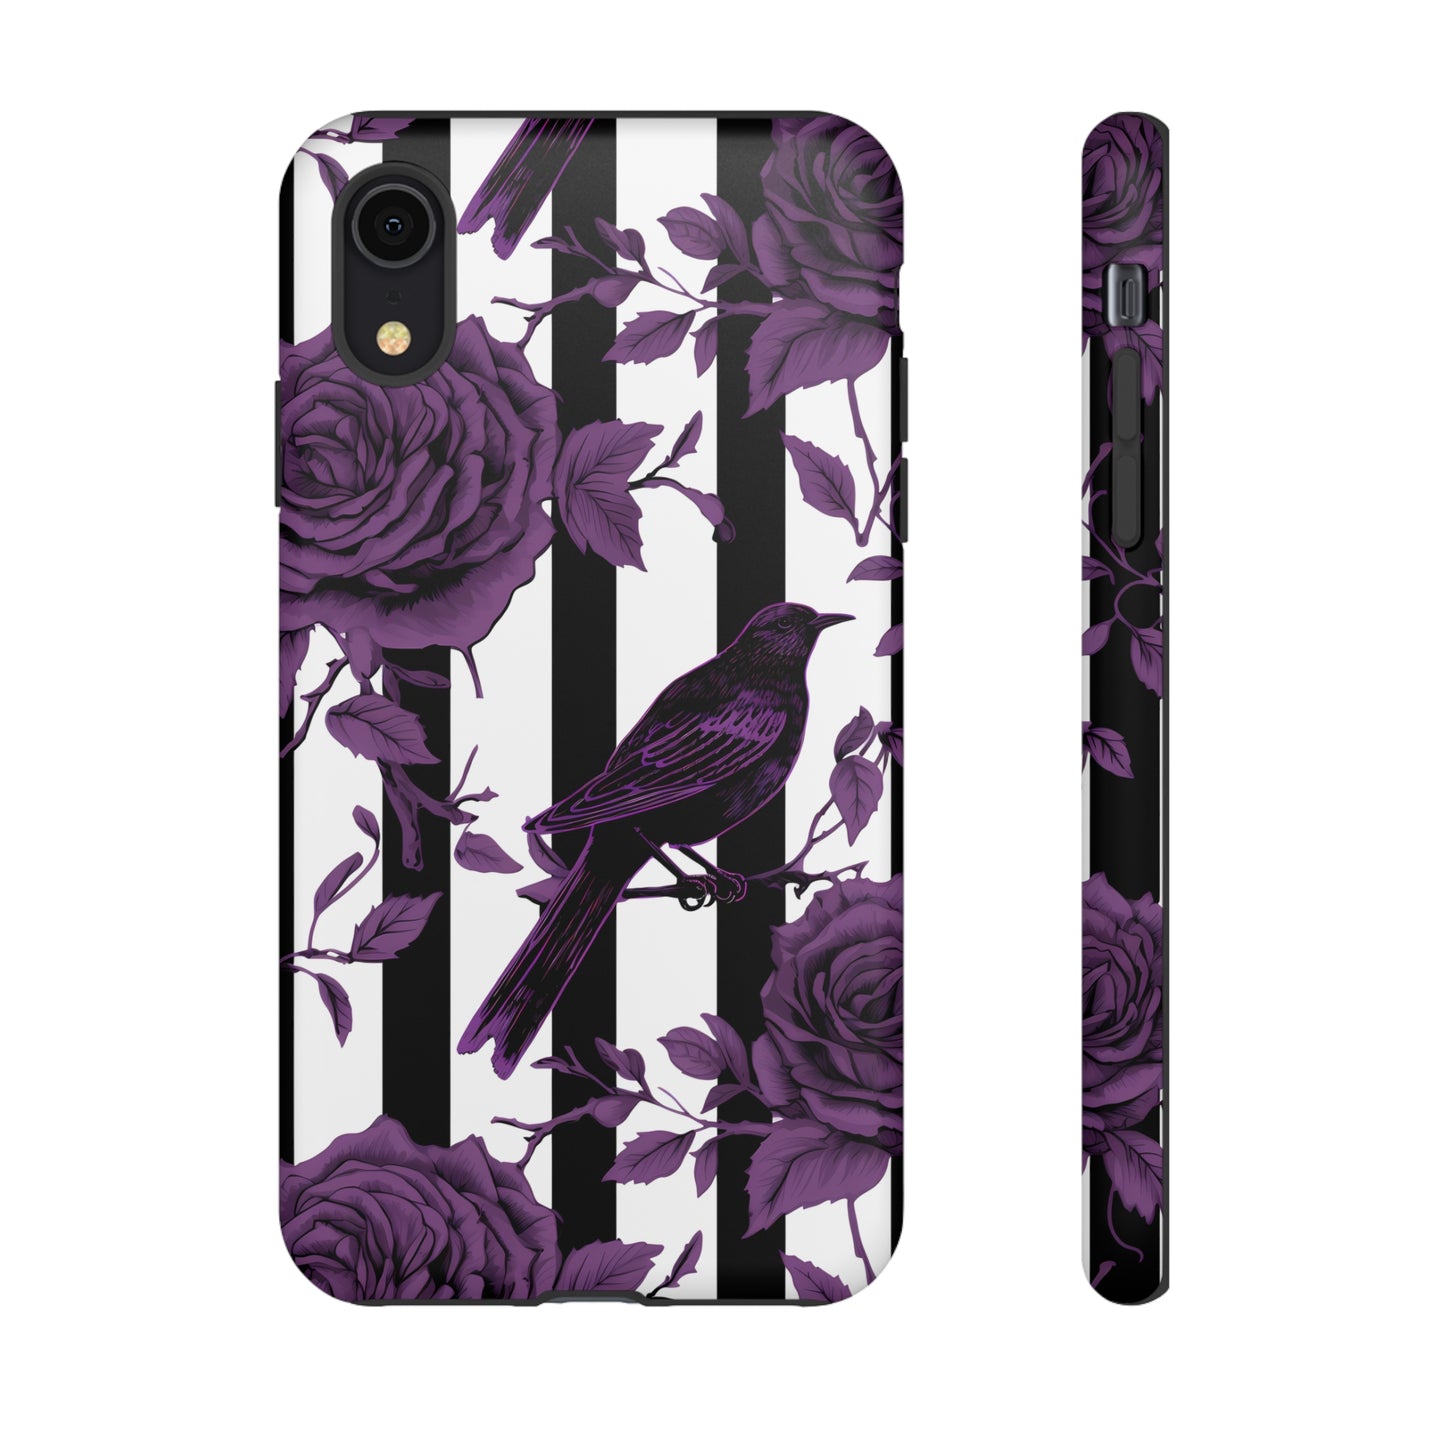 Striped Crows and Roses Tough Cases for iPhone Samsung Google PhonesPhone CaseVTZdesignsiPhone XRMatteAccessoriescrowsGlossy